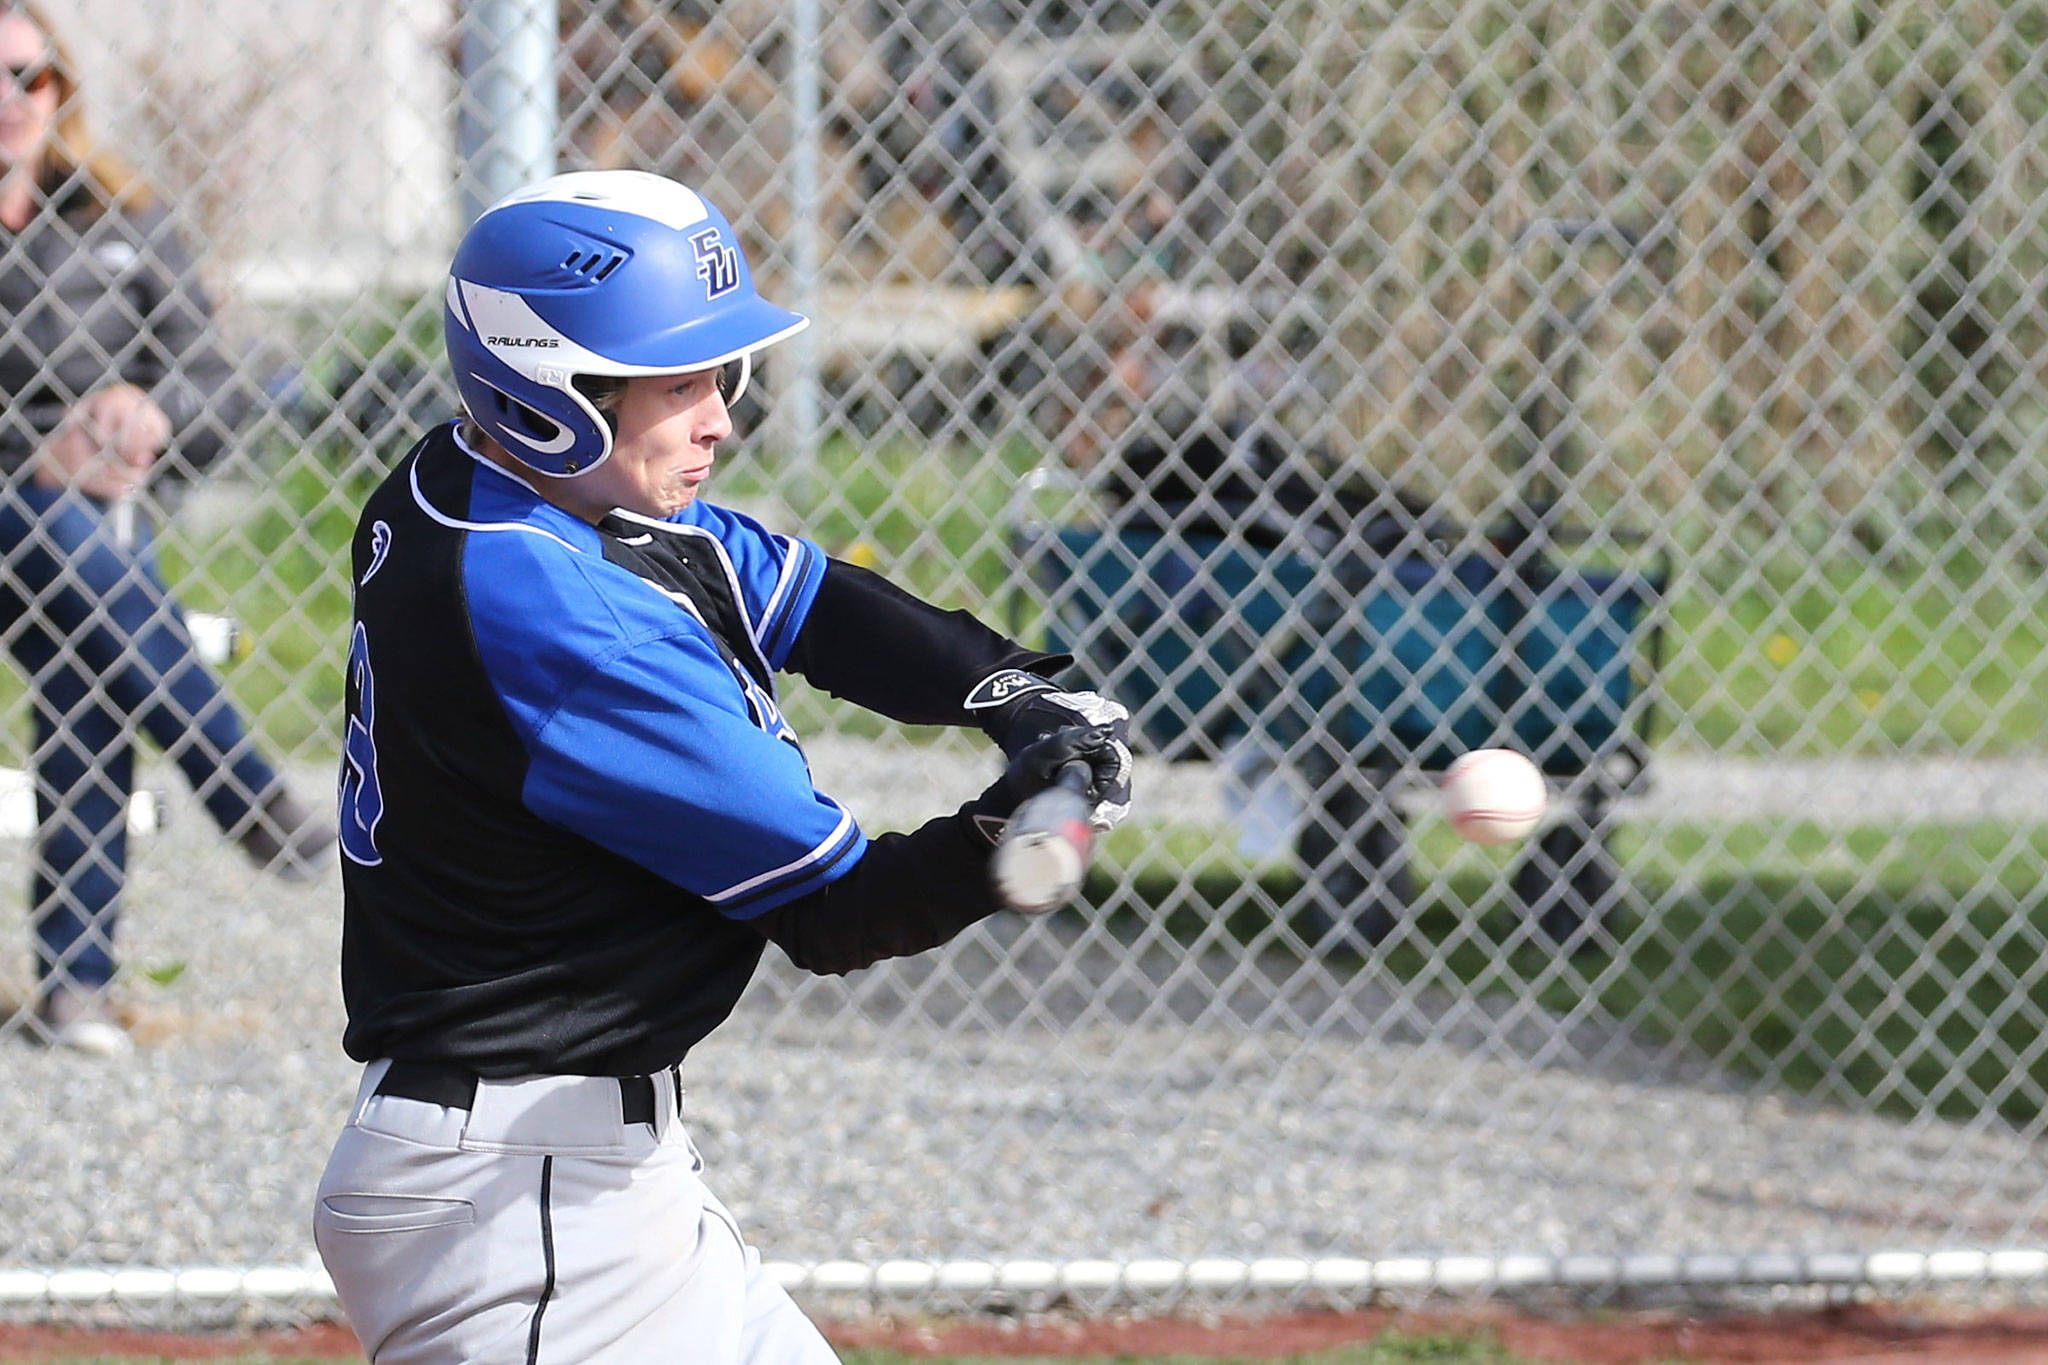 Drew Fry attacks a pitch in Friday’s game at Coupeville (Photo by John Fisken)